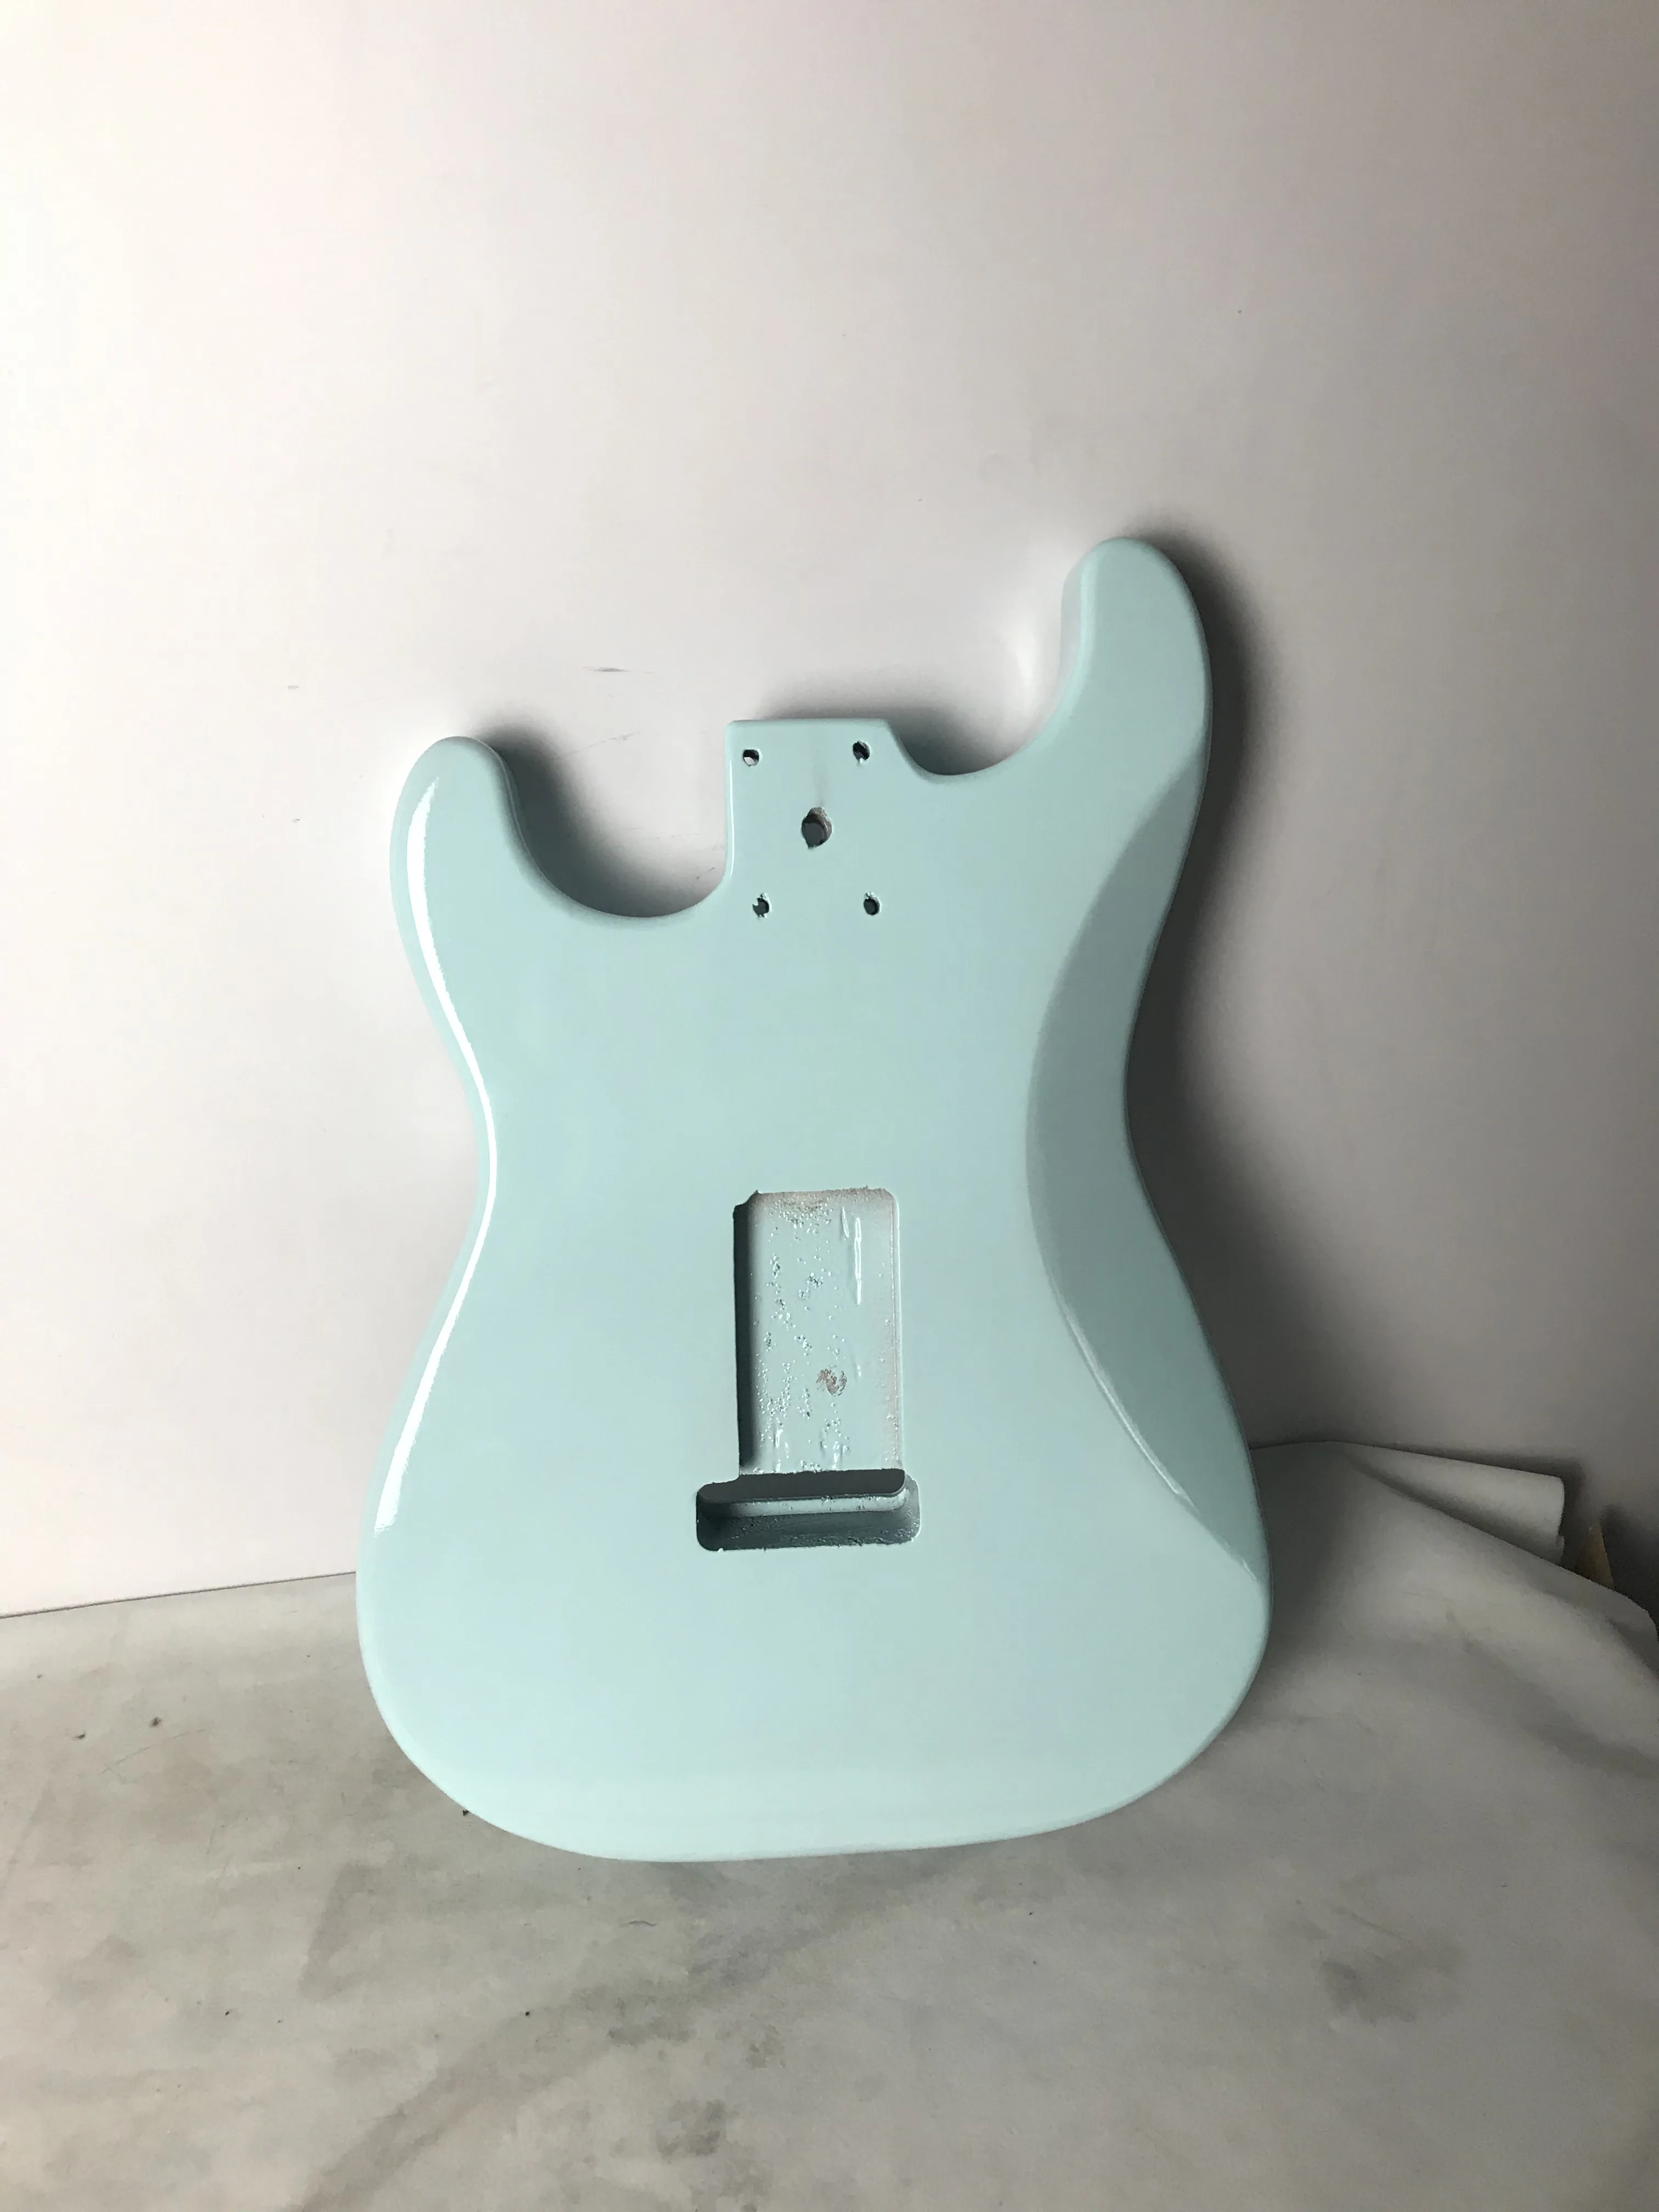 Good Quality New Color Electric Guitar Body Unfinished Semi-finished Barrel Fender Style DIY Guitar Part Guitar Panel Free Ship enlarge